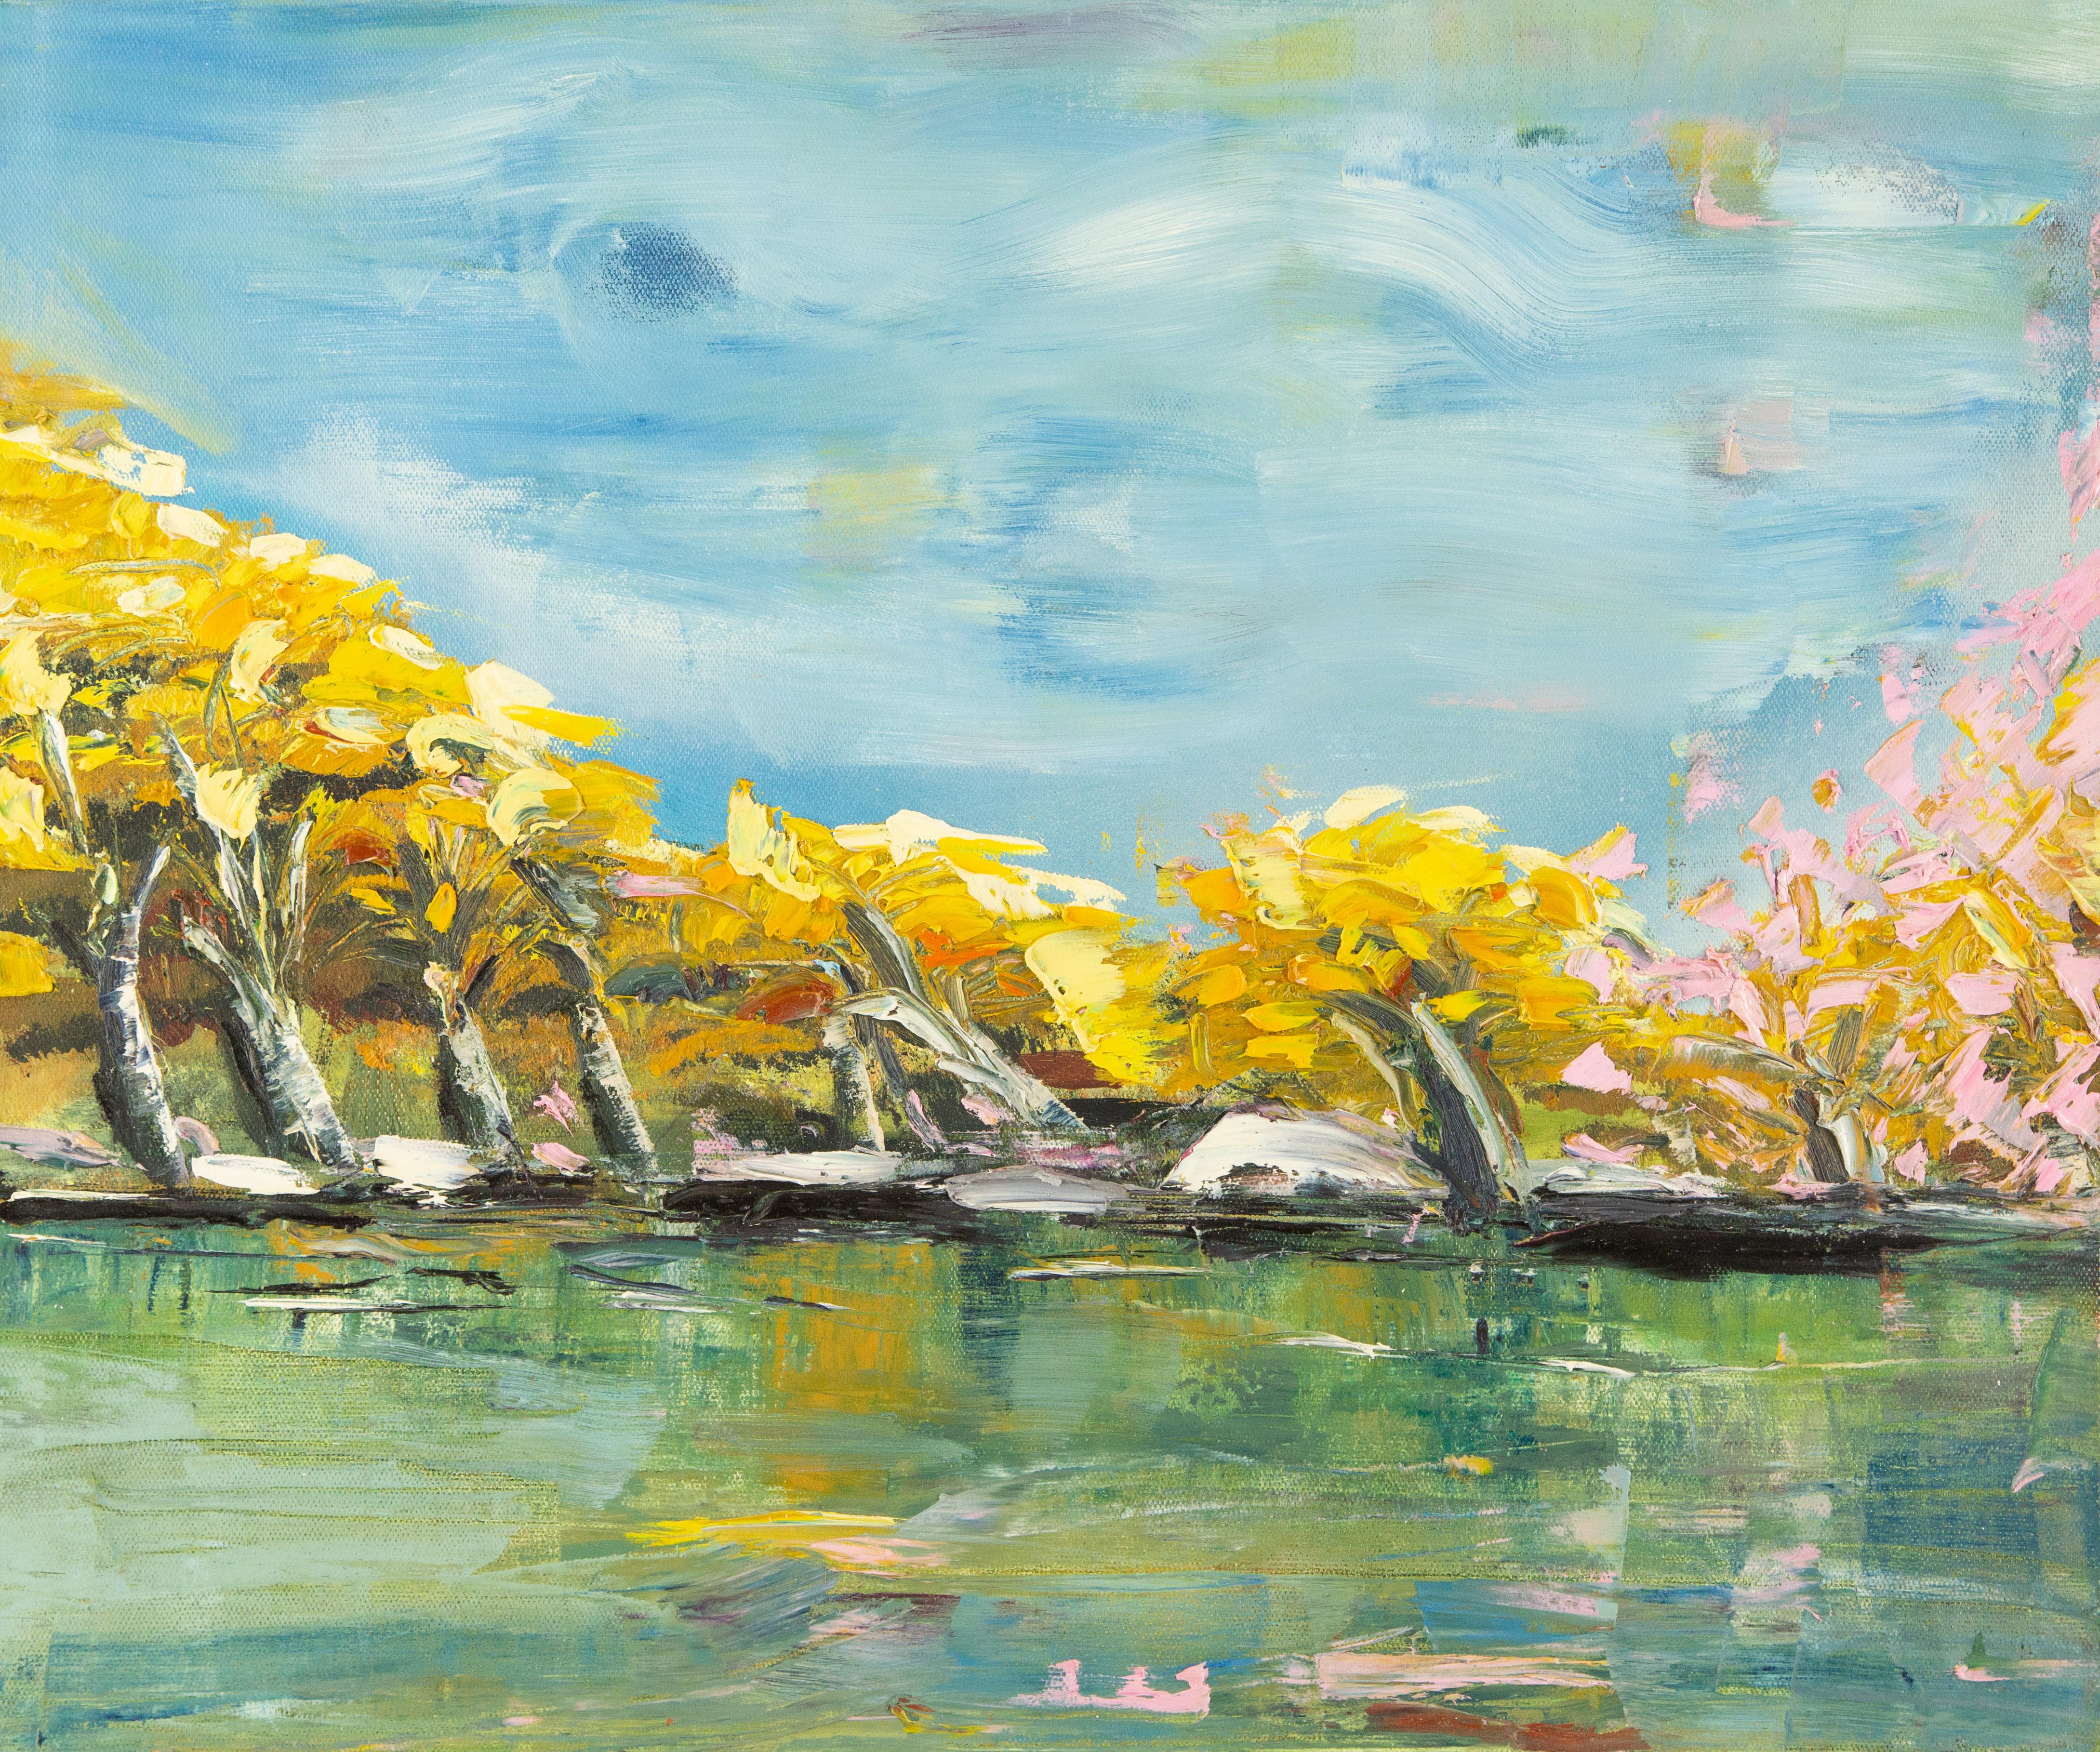  Title: Spring Day Within
 Medium: Oil on canvas
 Size: 19.5 x 23.5 inches
 Frame: Framing options available!
 Condition: The painting appears to be in excellent condition.
 Note: This painting is unstretched
 Year: 2015
 Artist: Yan Liu
 Signature: